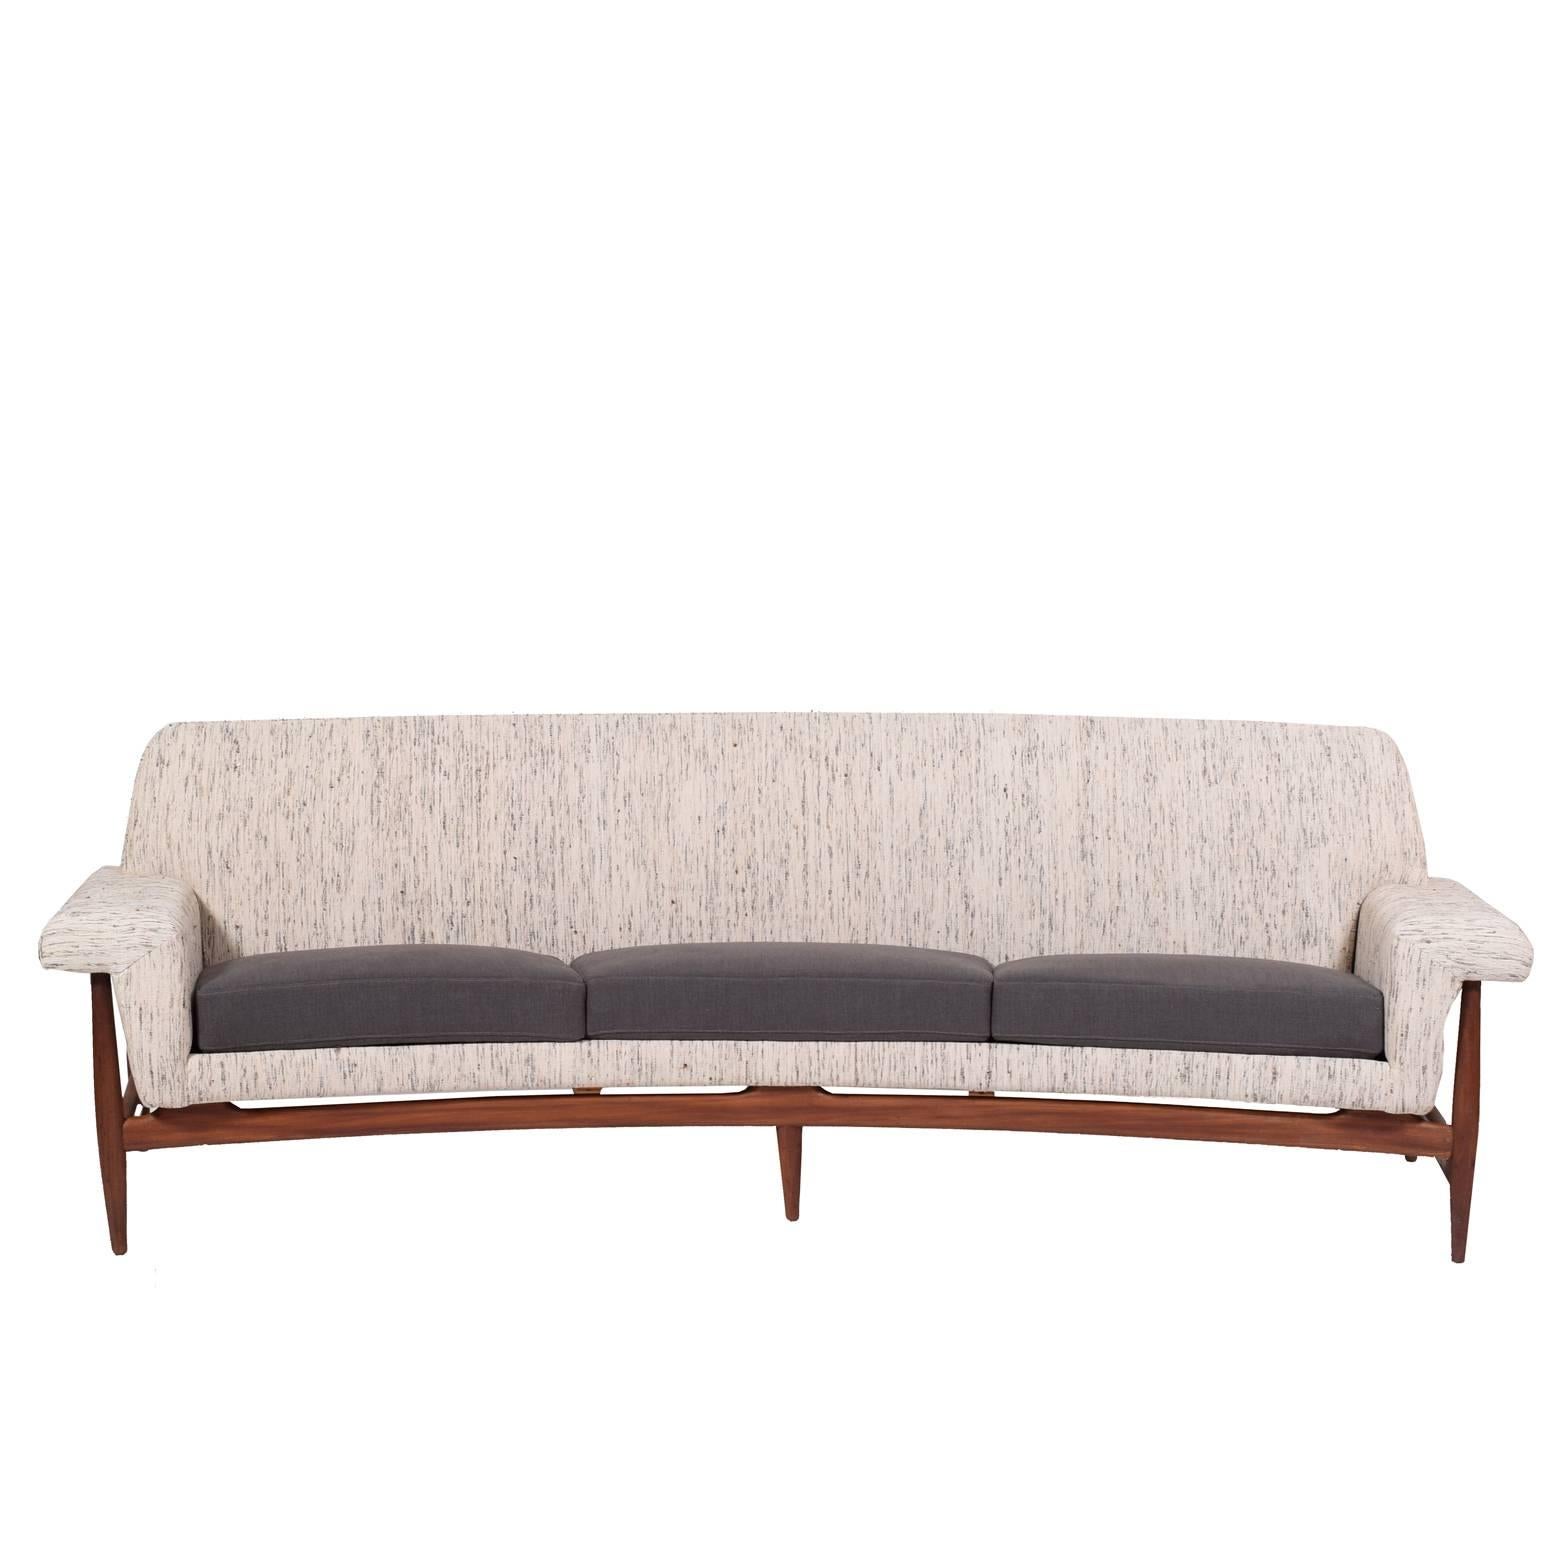 Long sofa curved sofa with three upholstered seat cushions and fully upholstered body. Solid teak exposed frame and legs. Designed to accommodate his Capri table. Year of design, 1958.
Made by Trensum.